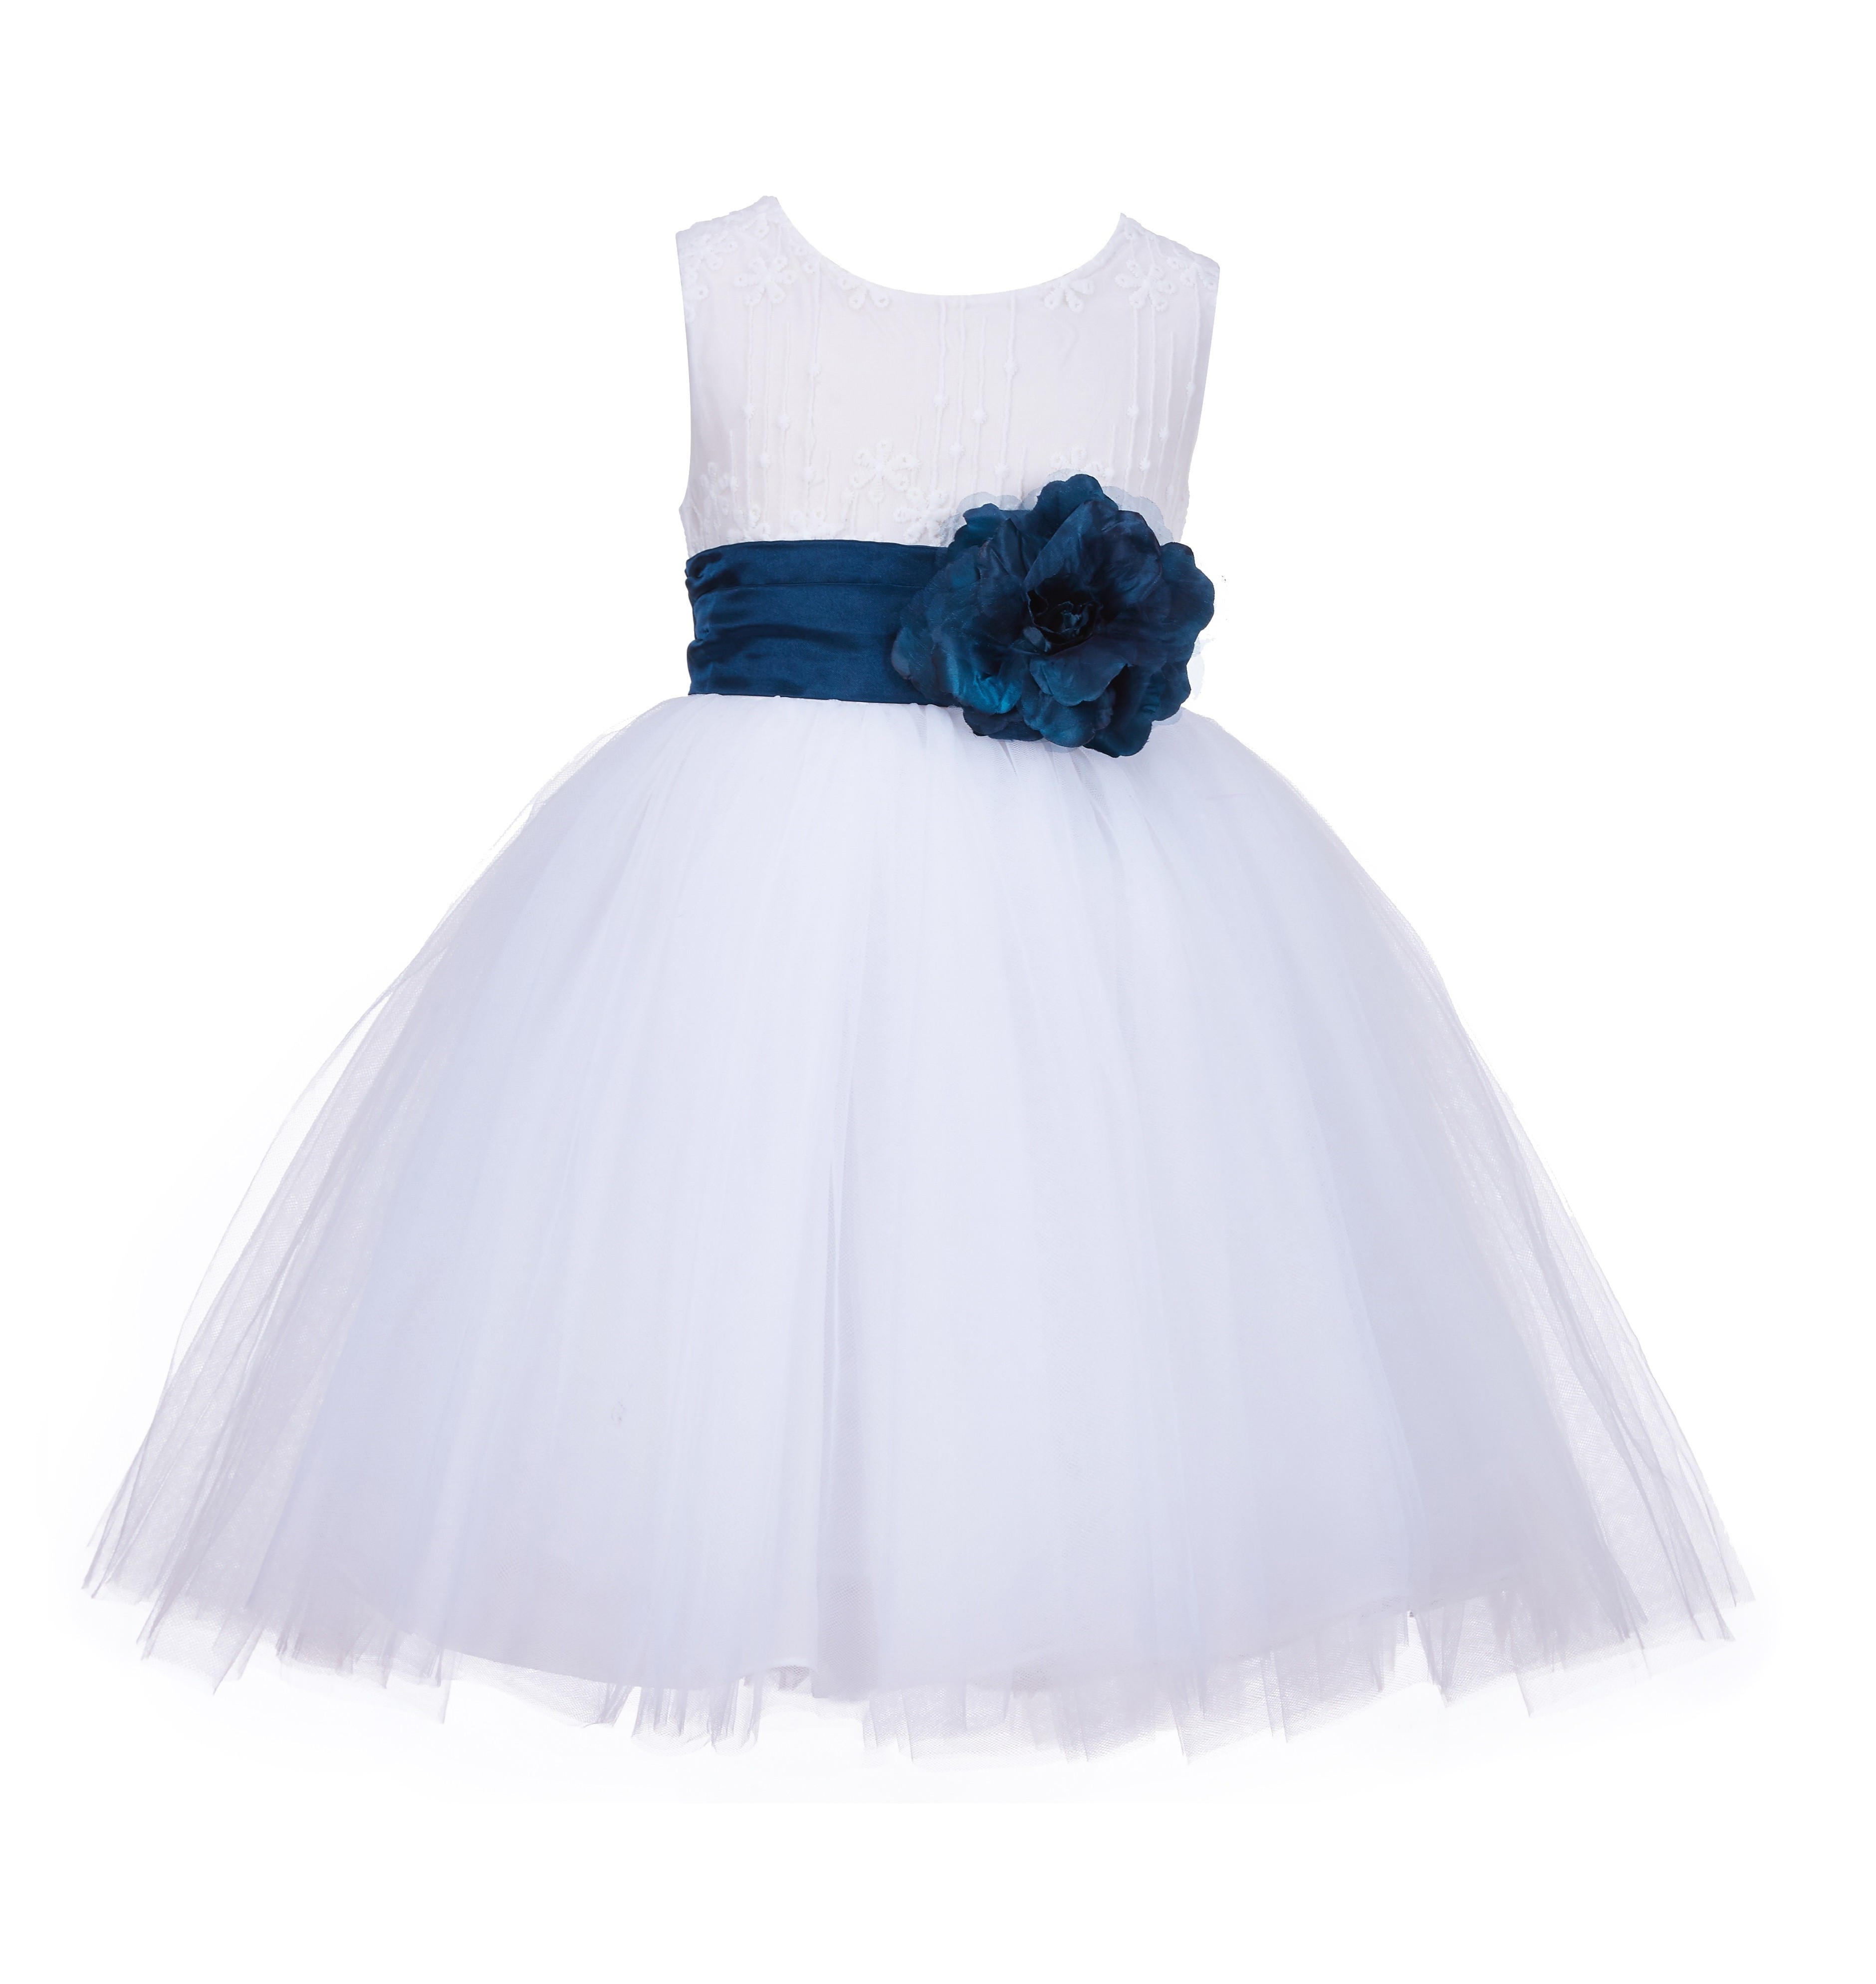 White/Peacock Lace Embroidery Tulle Flower Girl Dress Wedding 118